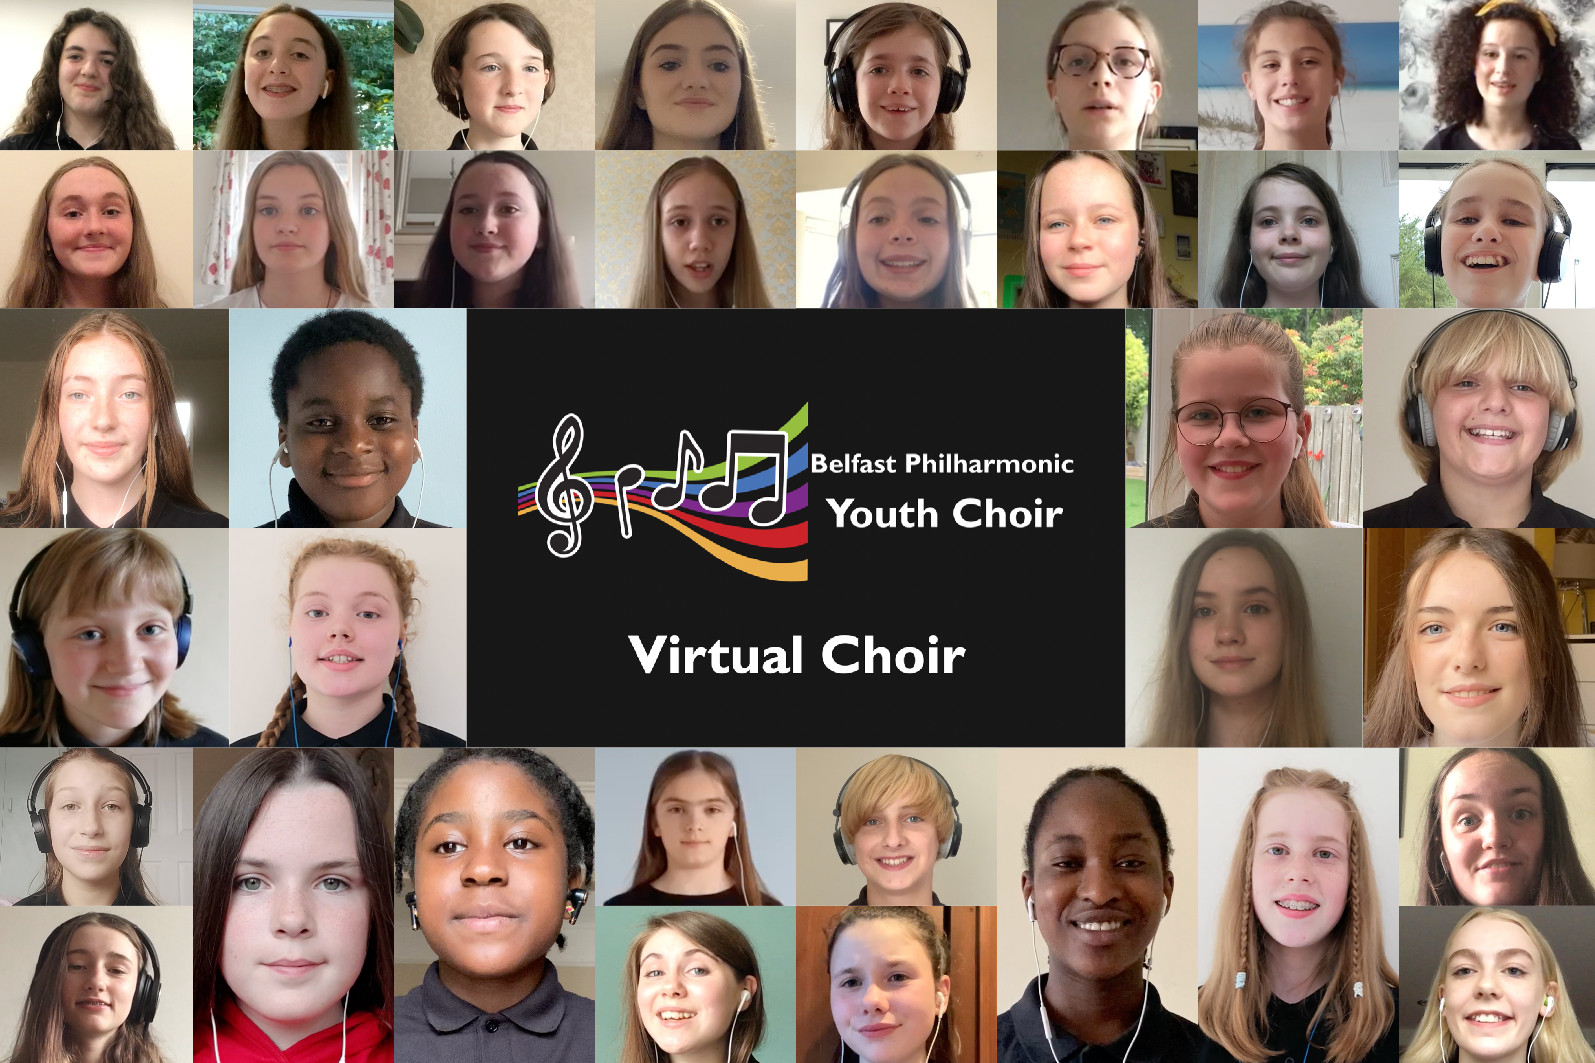 Youth Choir composition video!